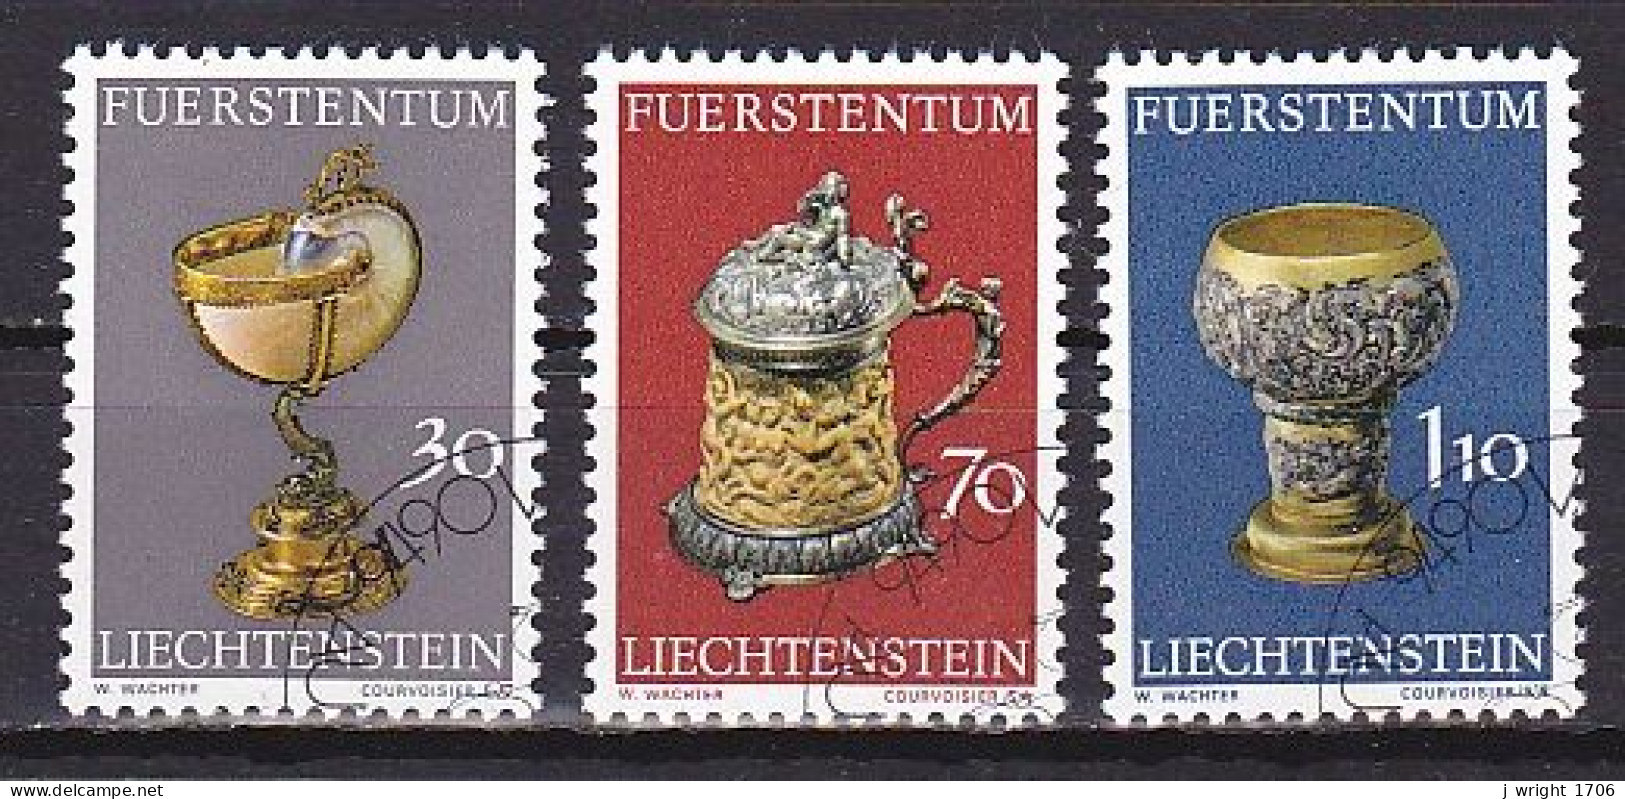 Liechtenstein, 1973, Prince's Collection Treasures 1st Series, Set, CTO - Used Stamps